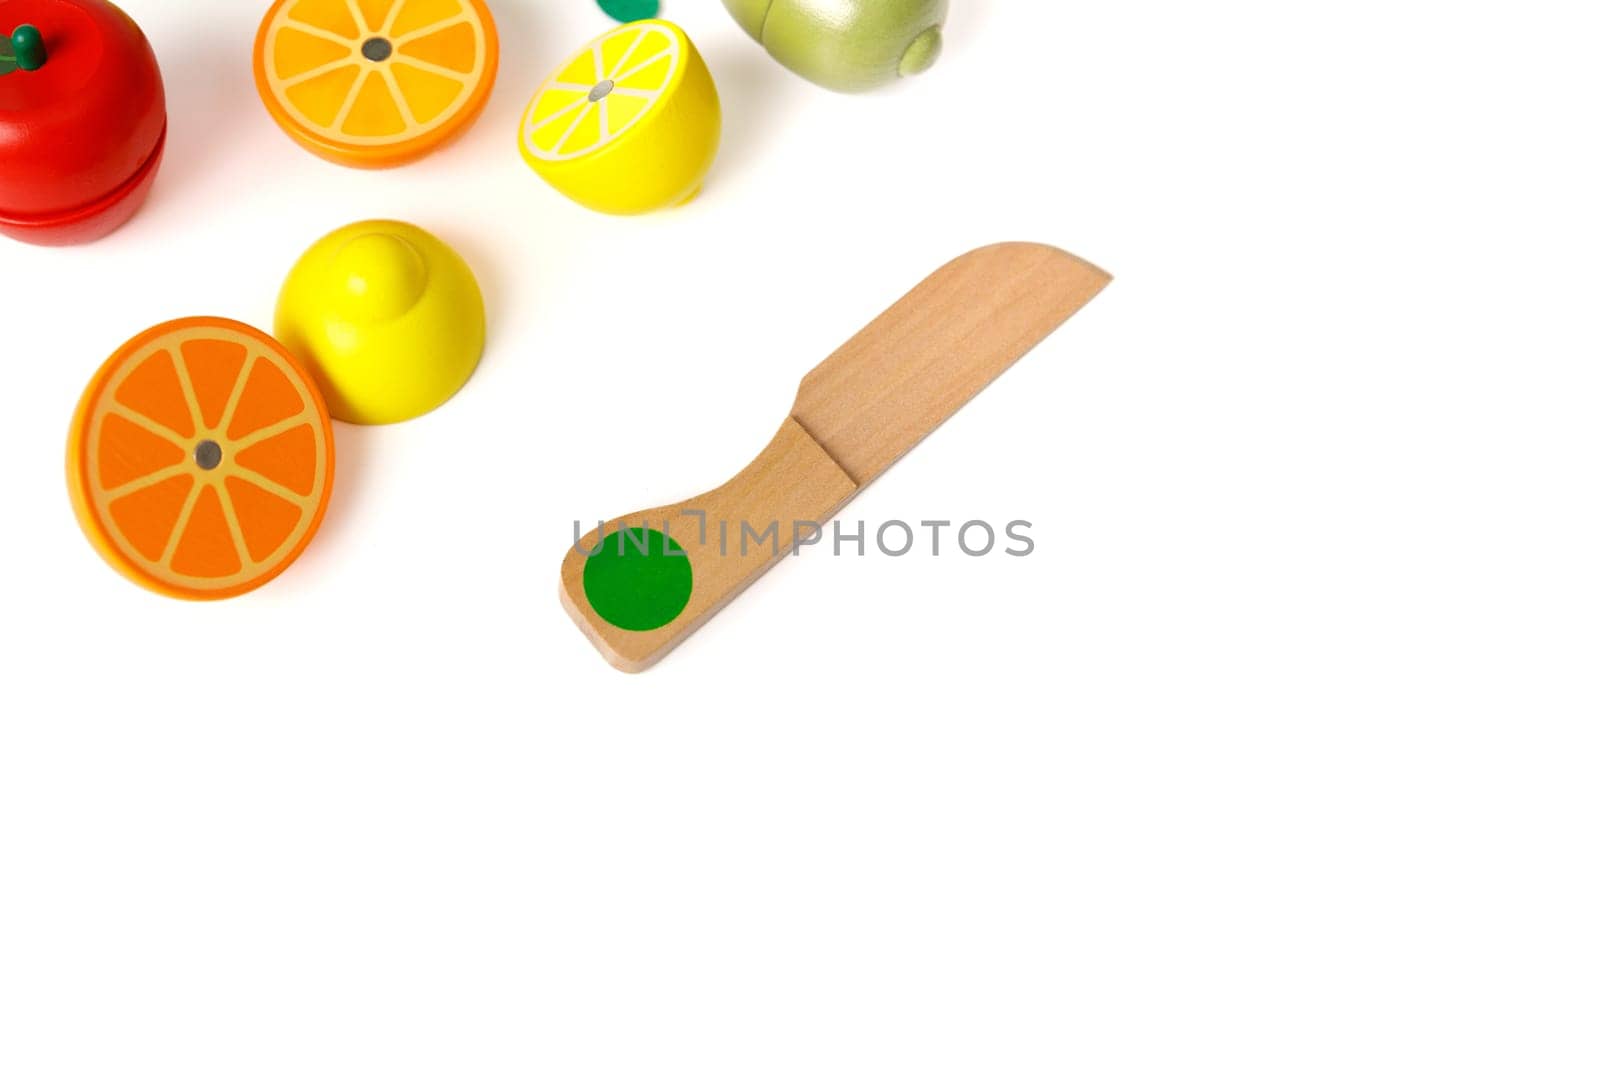 Educational toy set in the form of cut fruits and a wooden knife, isolated on white background, copy space.